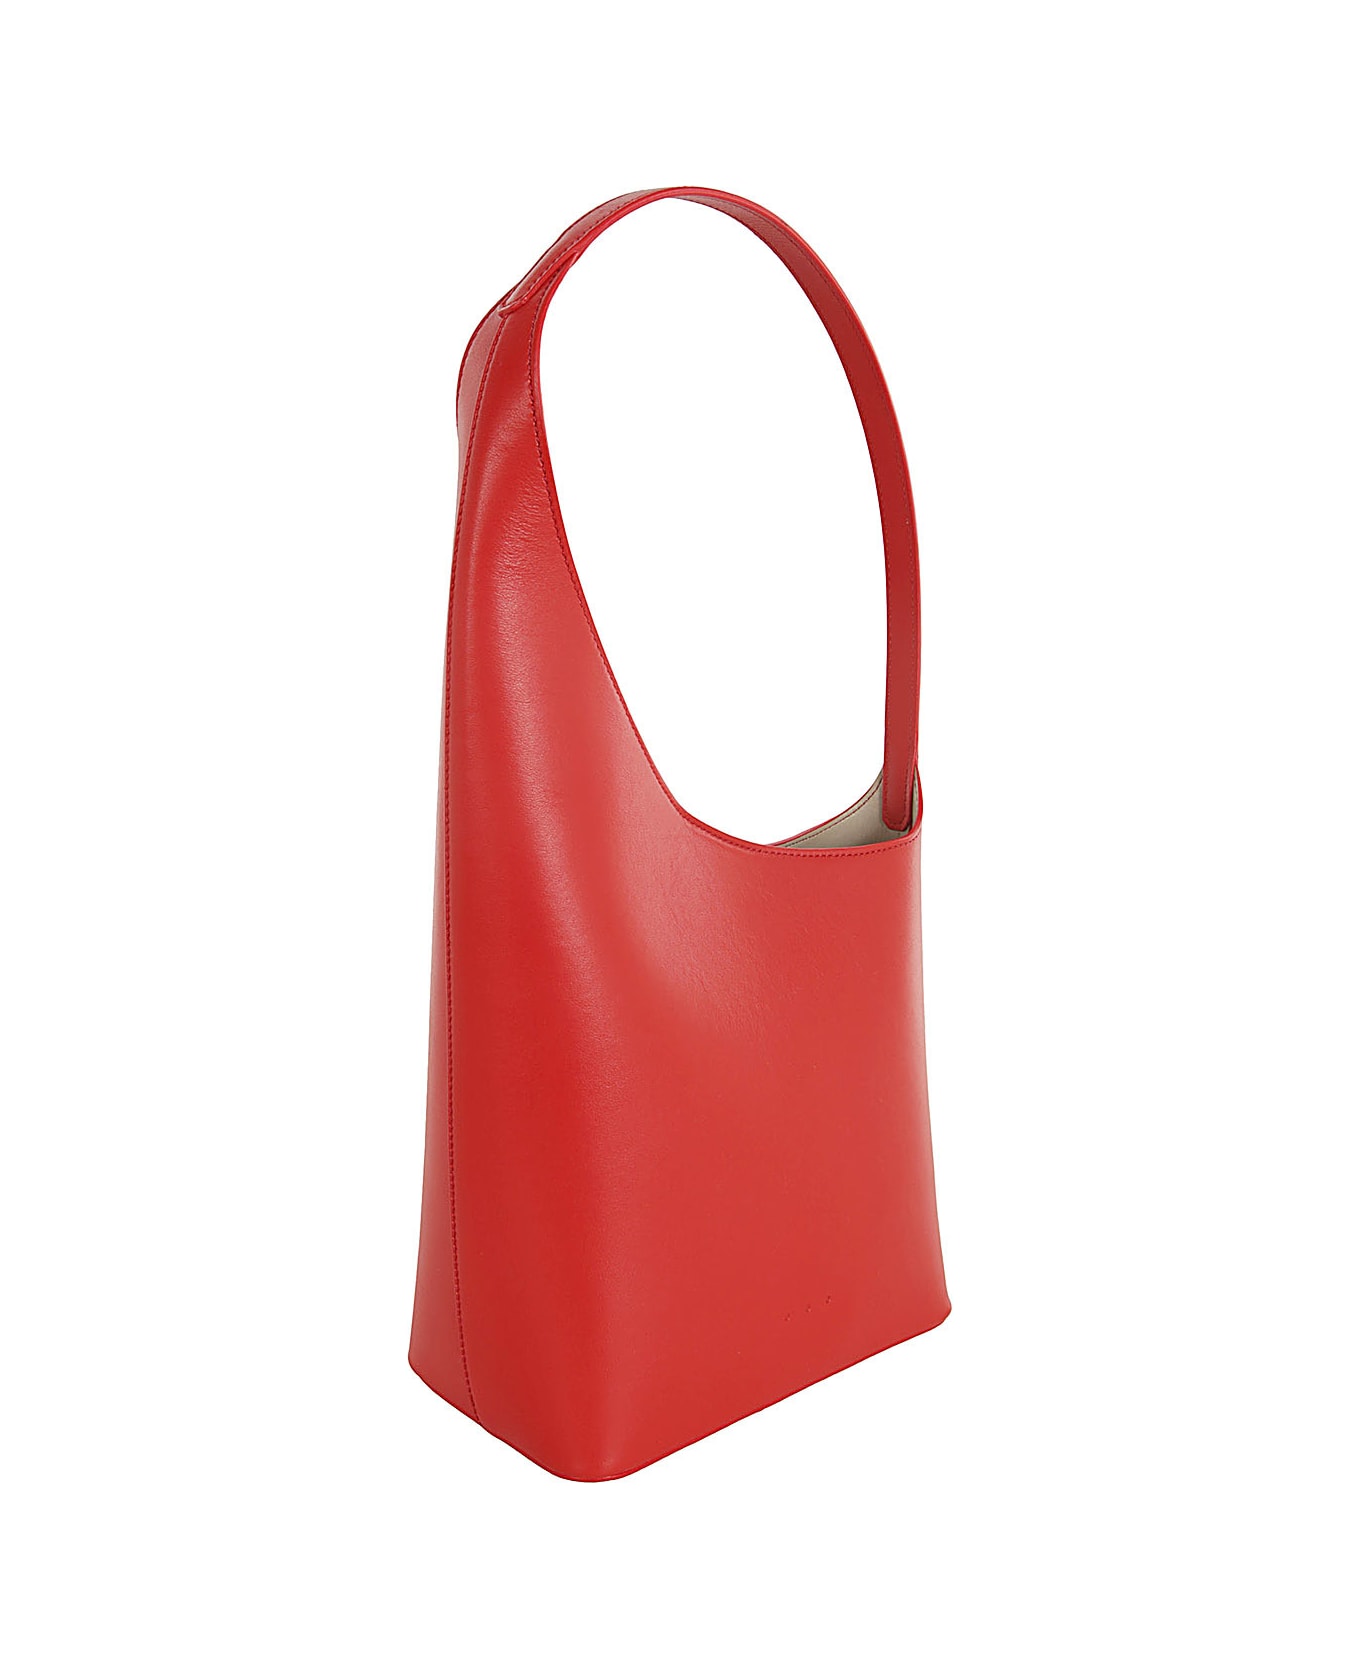 Aesther Ekme Demi Lune Tote Bag - Parrot トートバッグ